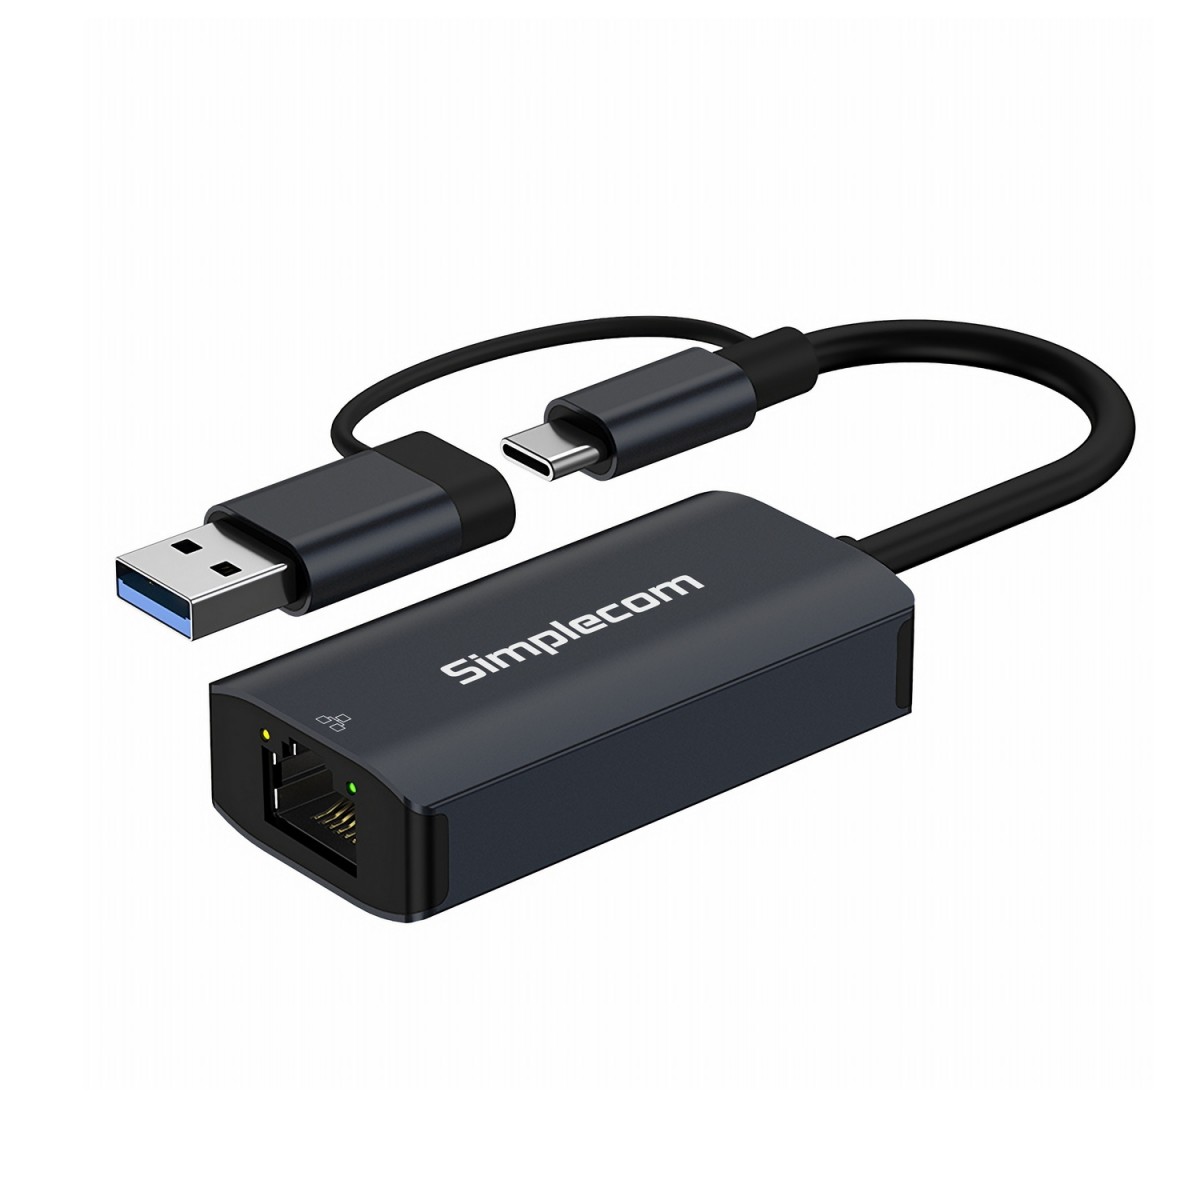  USB-C Type-C and USB-A to RJ45 Gigabit Ethernet Adapter  